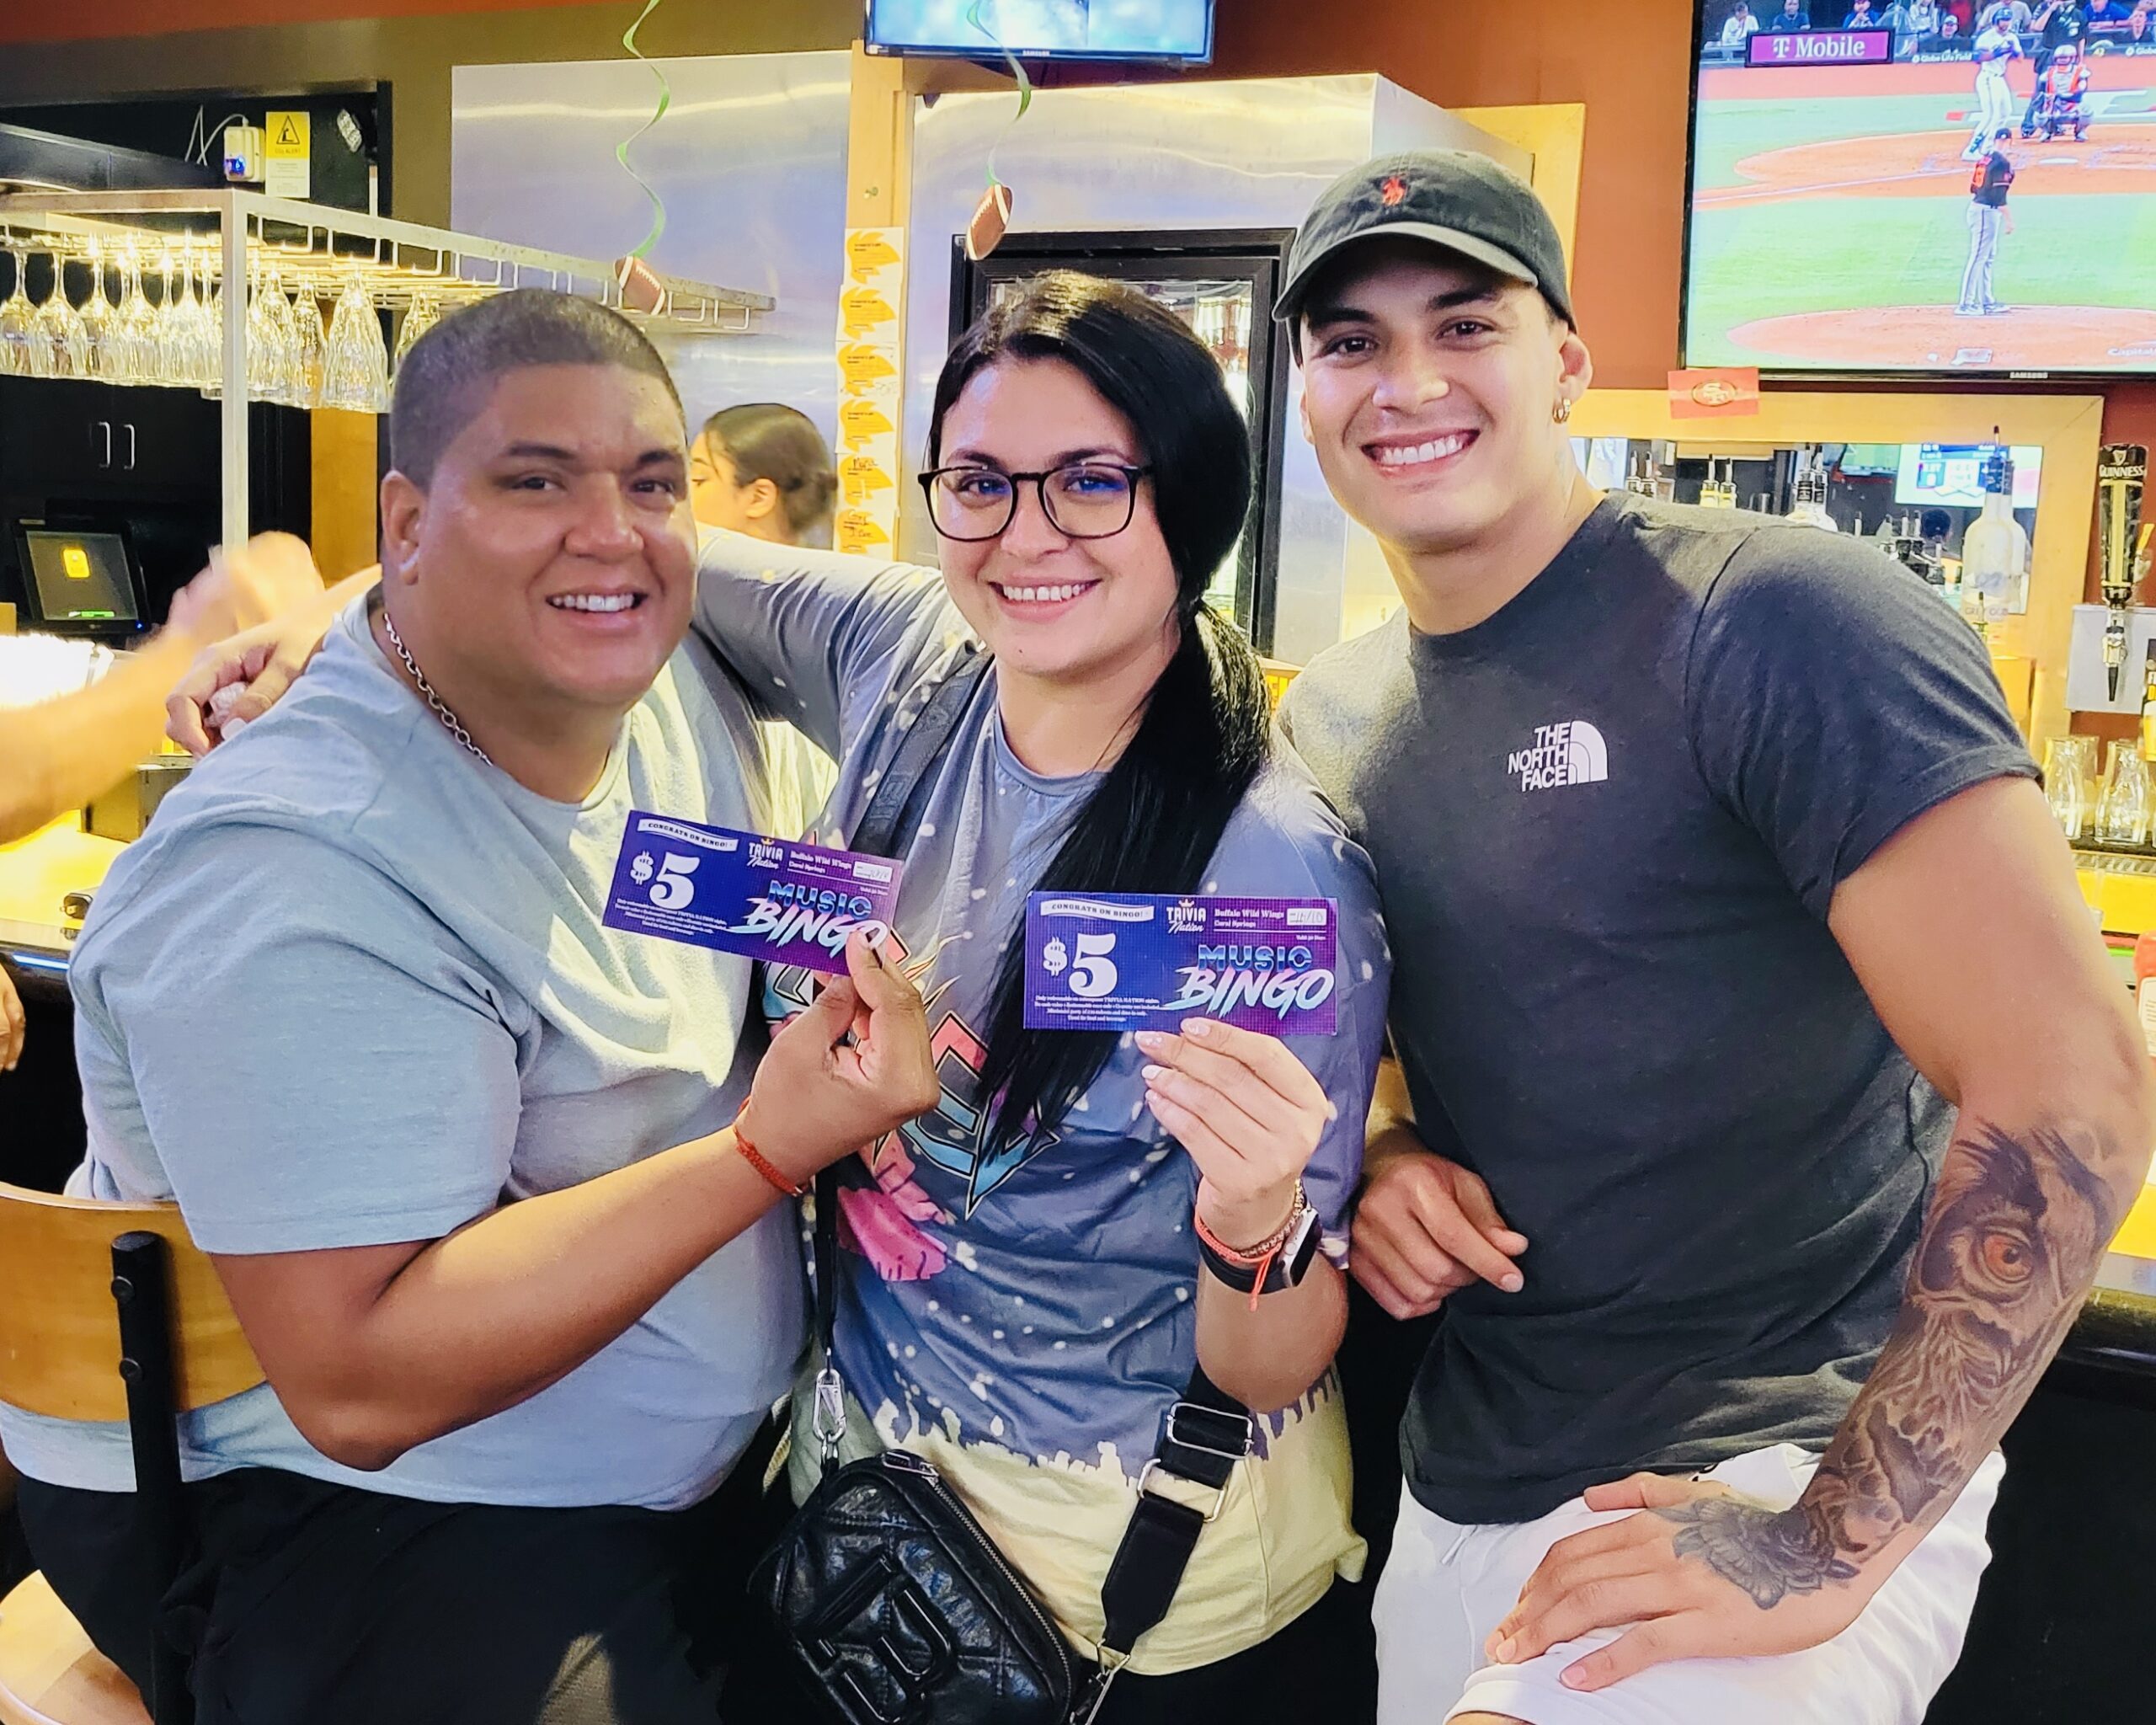 Buffalo Wild Wings Coral Springs FL 33067 trivia night: three adults, two men and one woman, standing together holding up music bingo coupons and smiling with a bar in the background